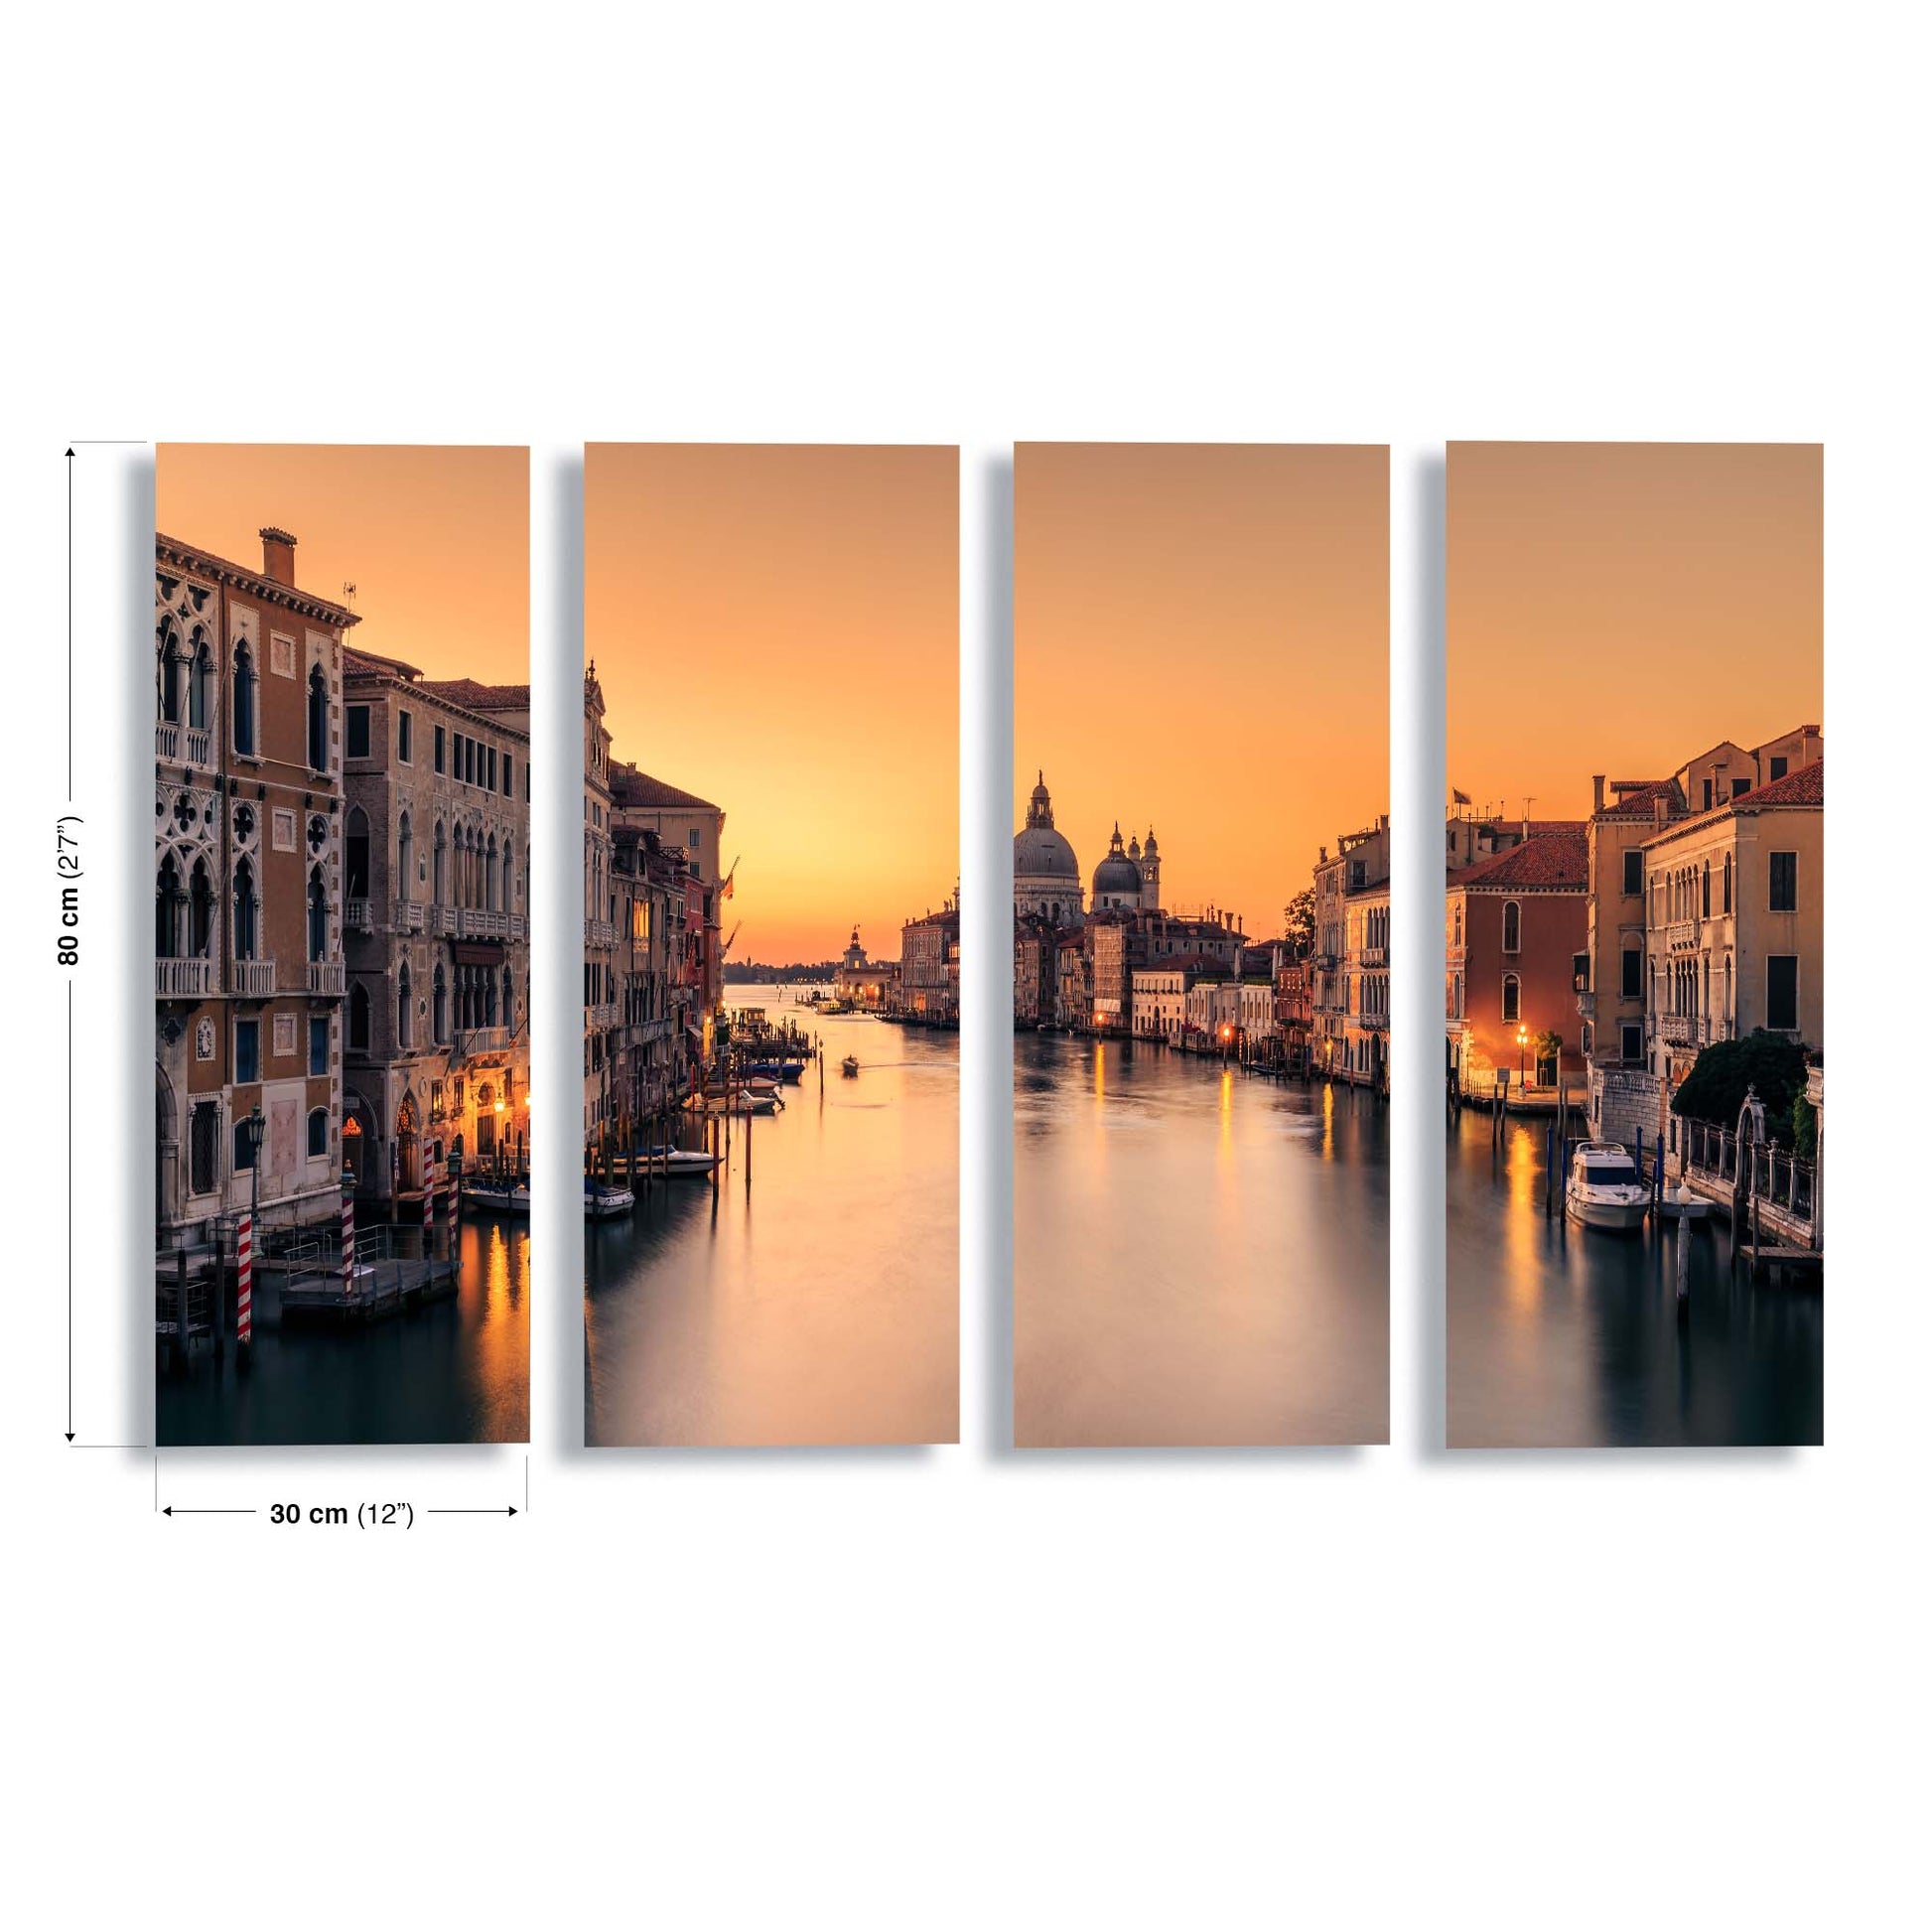 Dawn on Venice by Eric Zhang Canvas Print - USTAD HOME